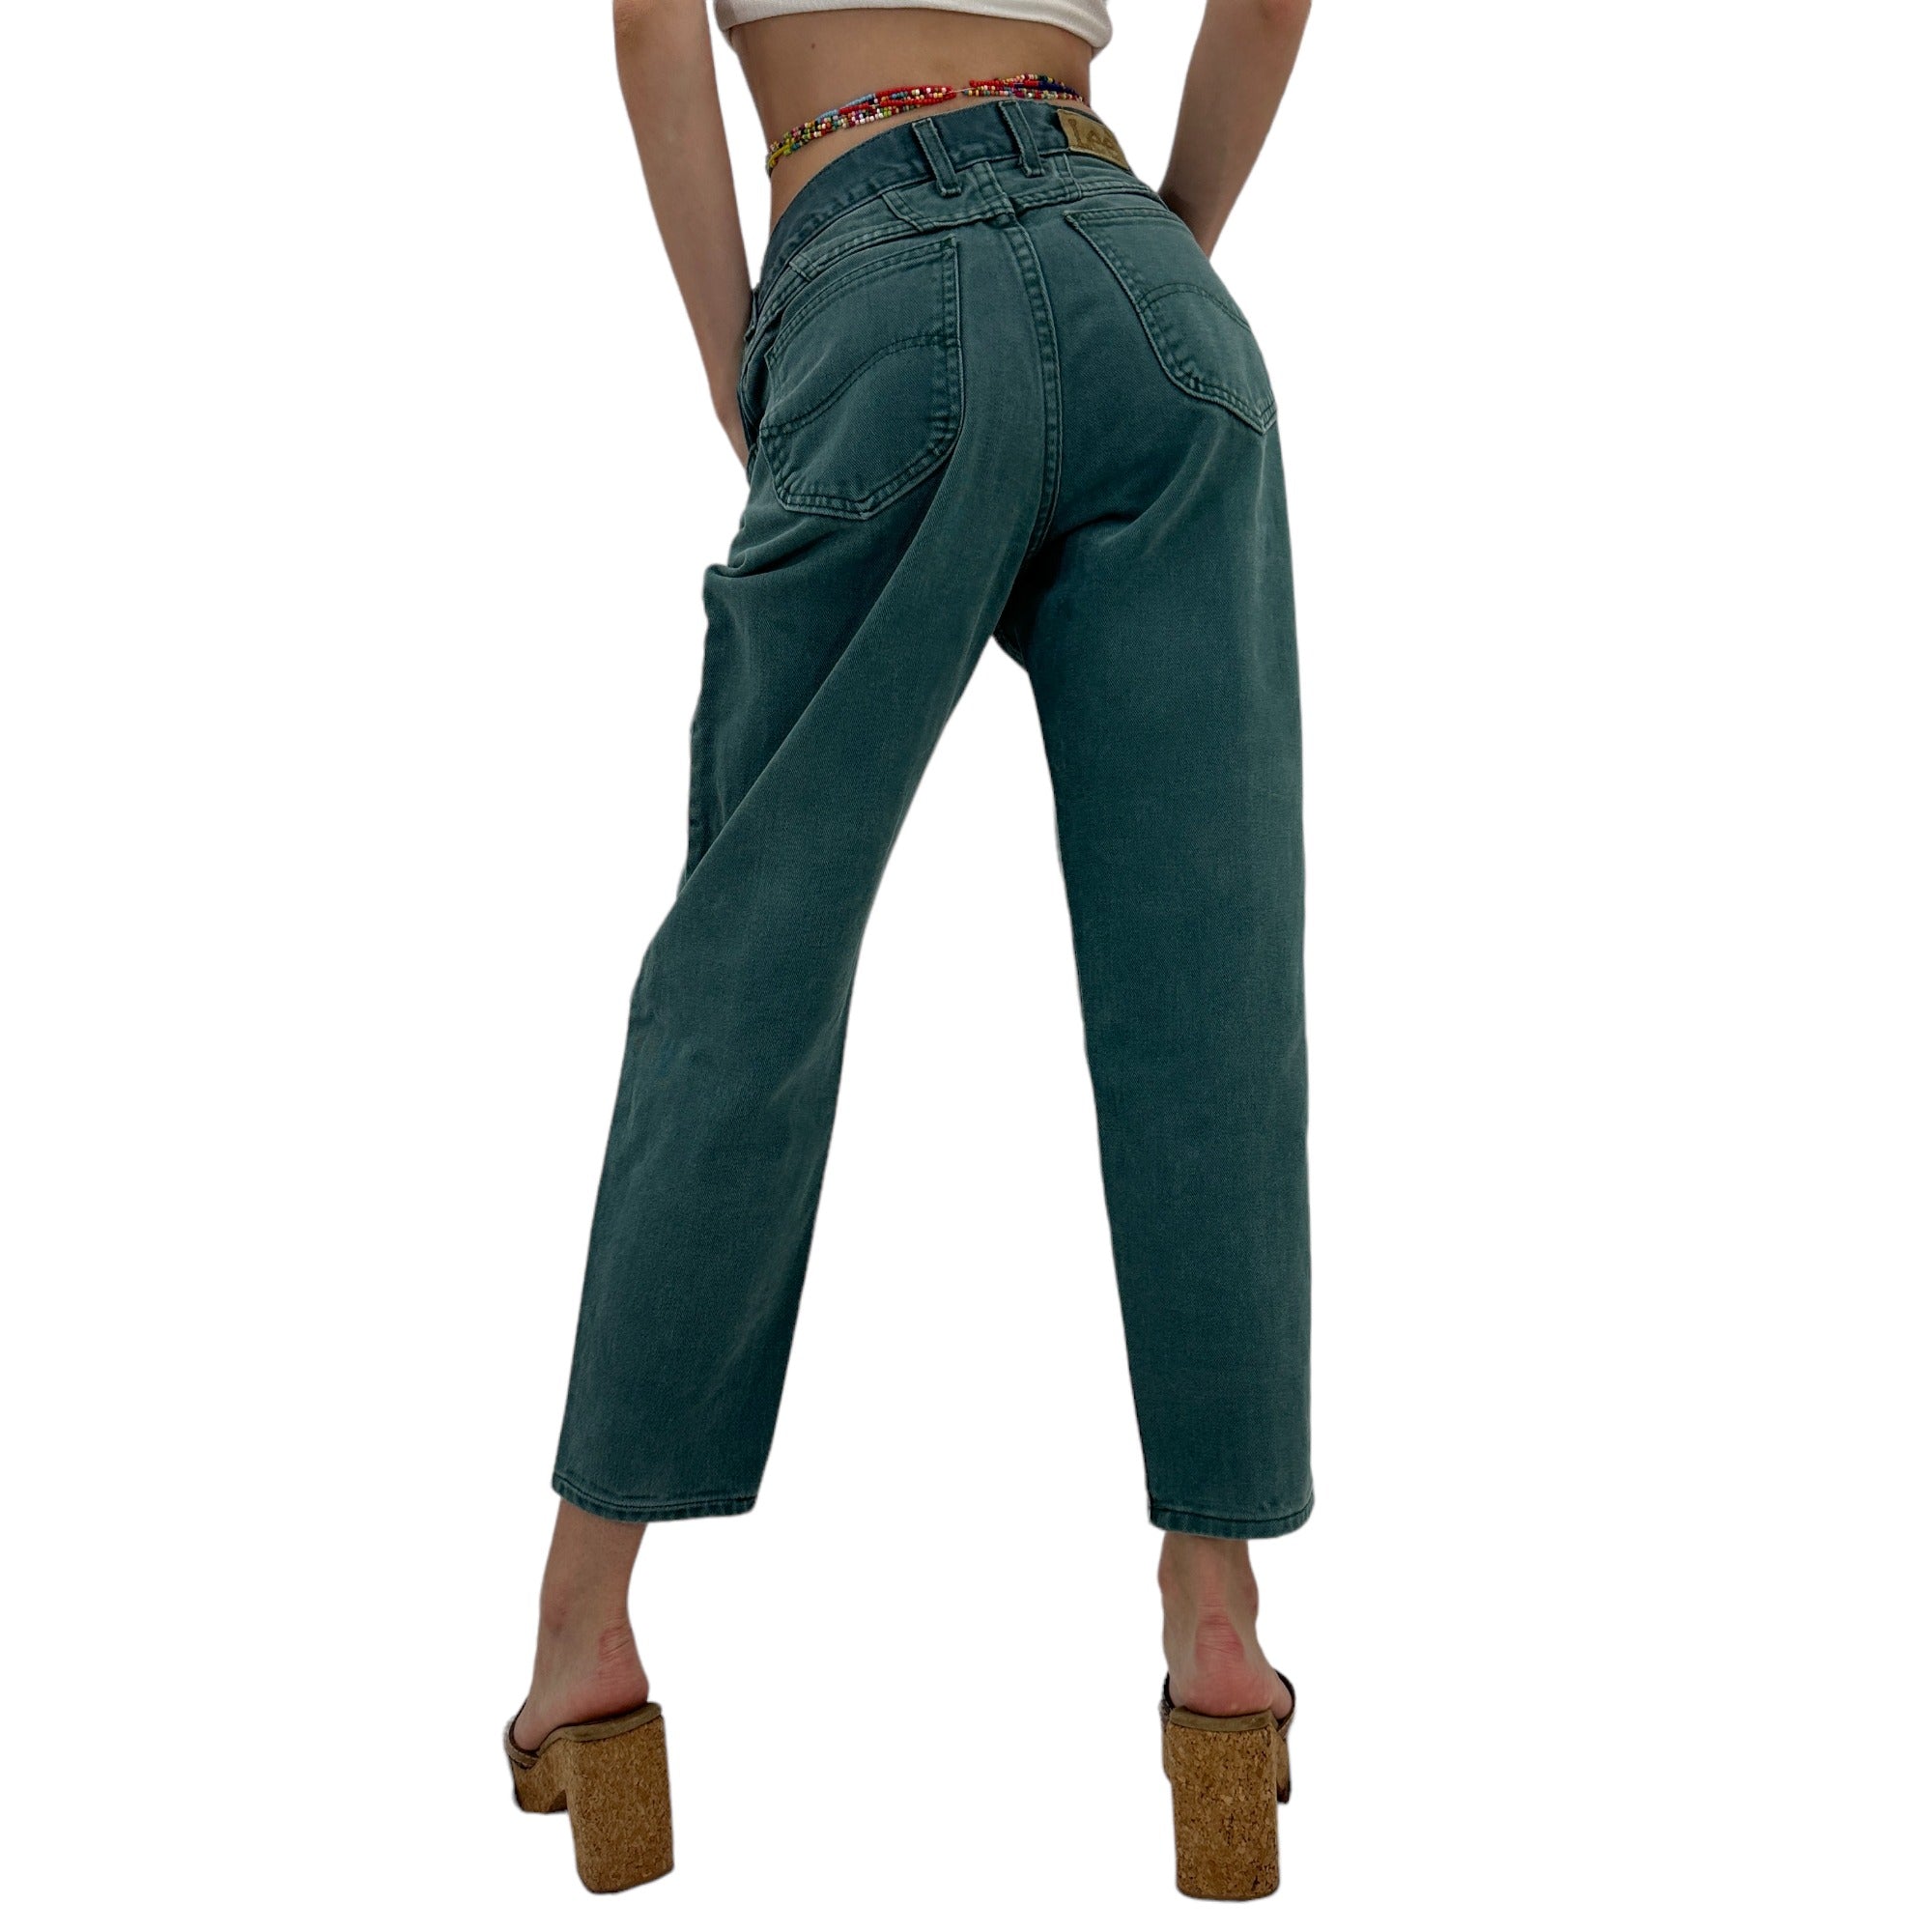 90s Vintage LEE Green Tapered Pants [XS, S]